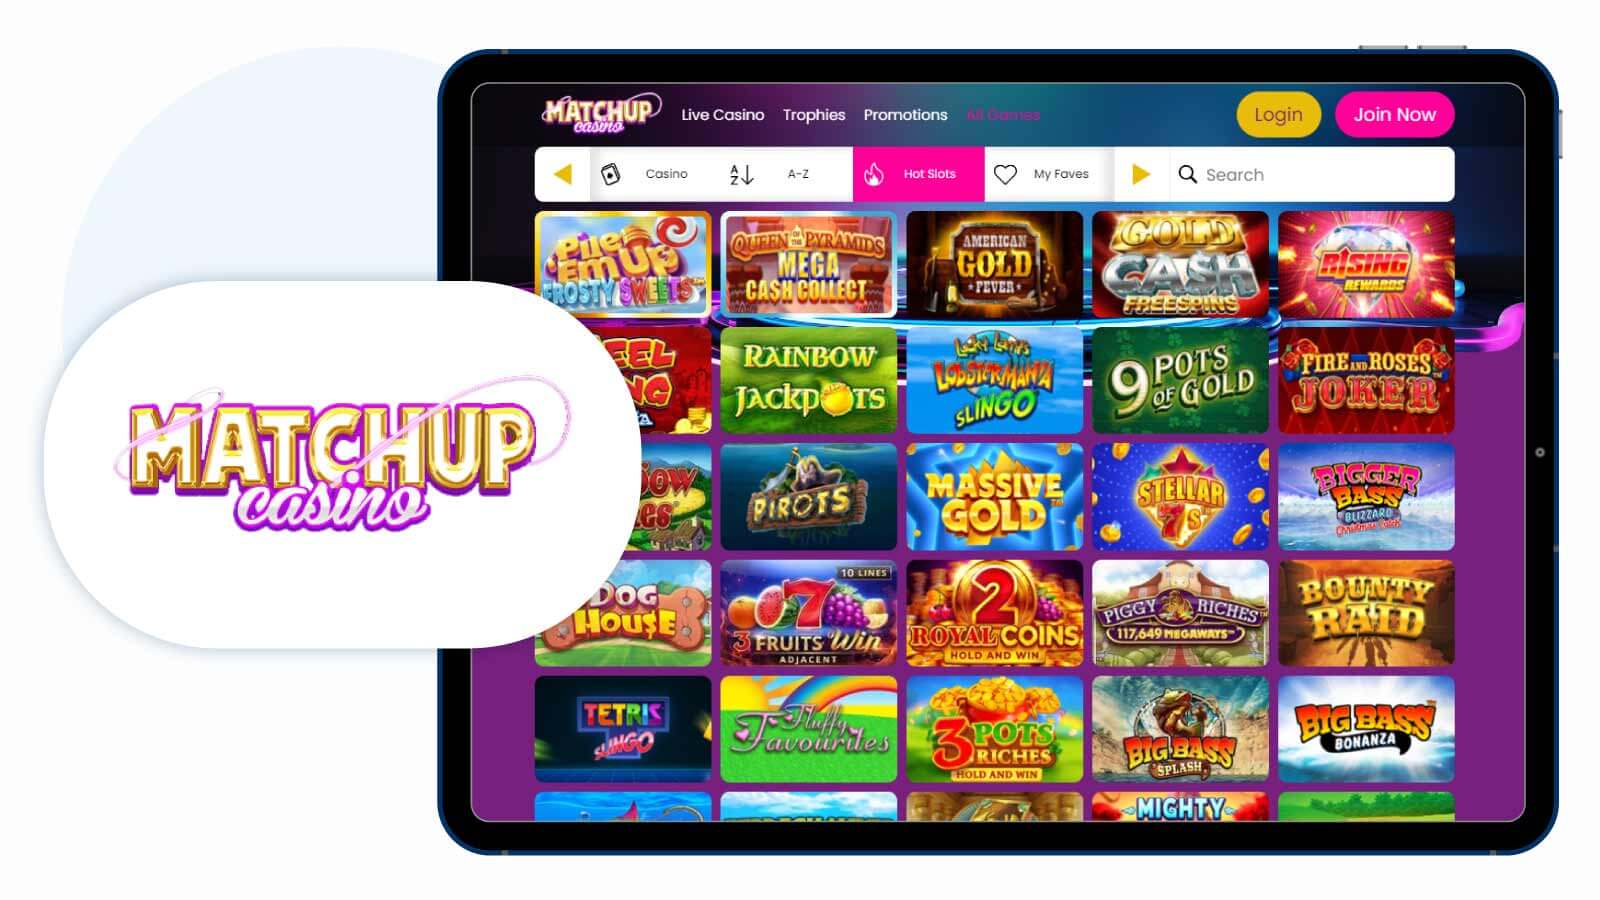 Matchup Casino – Top Alternative New Online Slots Site